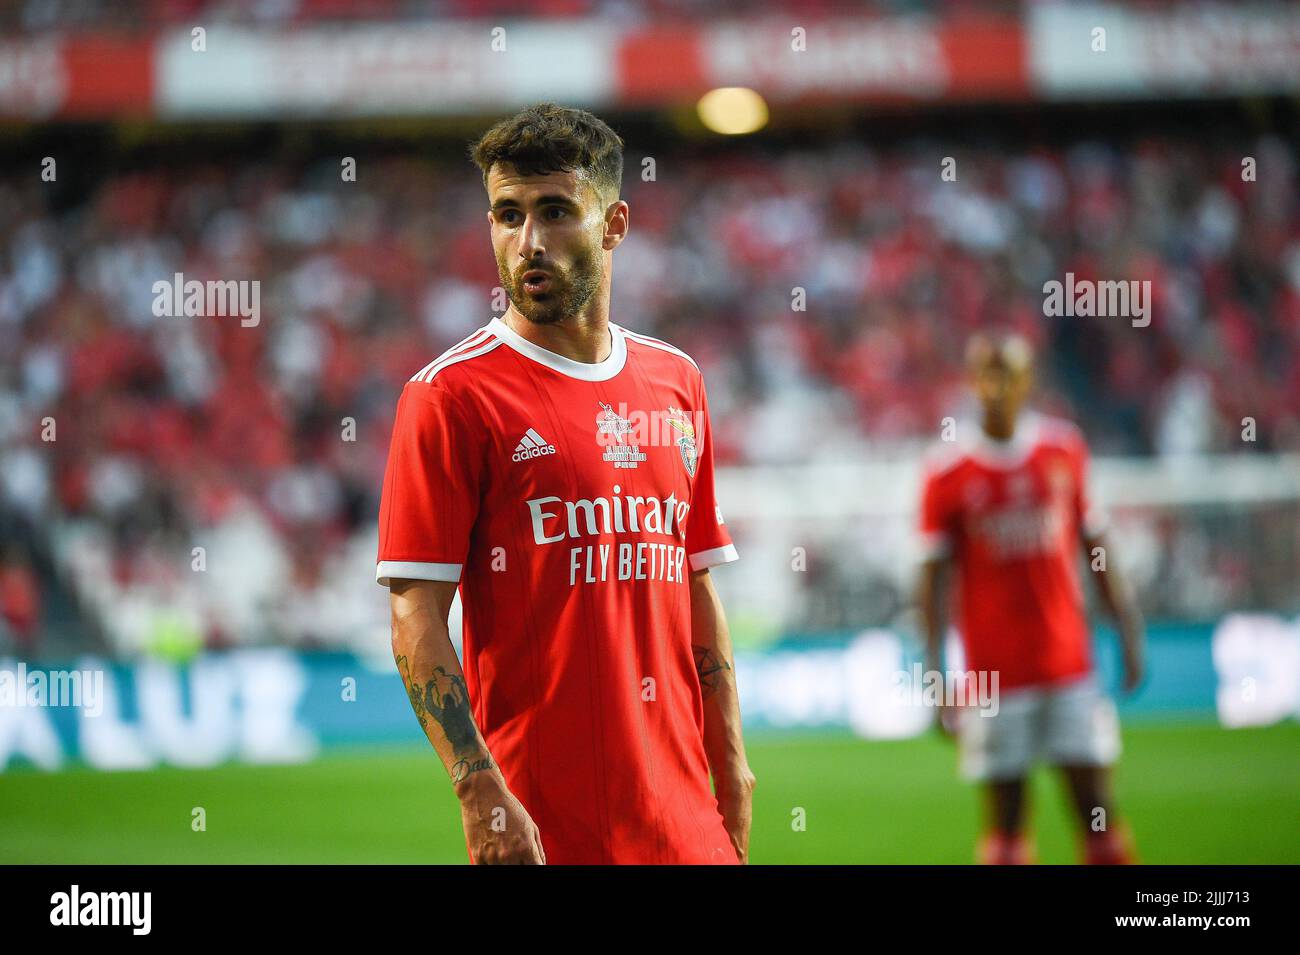 Lisbon, Portugal. 26th July, 2022. Rafa Silva from Benfica seen during the Eusebio Cup football match between Benfica and Newcastle at Estadio da Luz. Final score: Benfica 3:2 Newcastle. (Photo by Bruno de Carvalho/SOPA Images/Sipa USA) Credit: Sipa USA/Alamy Live News Stock Photo